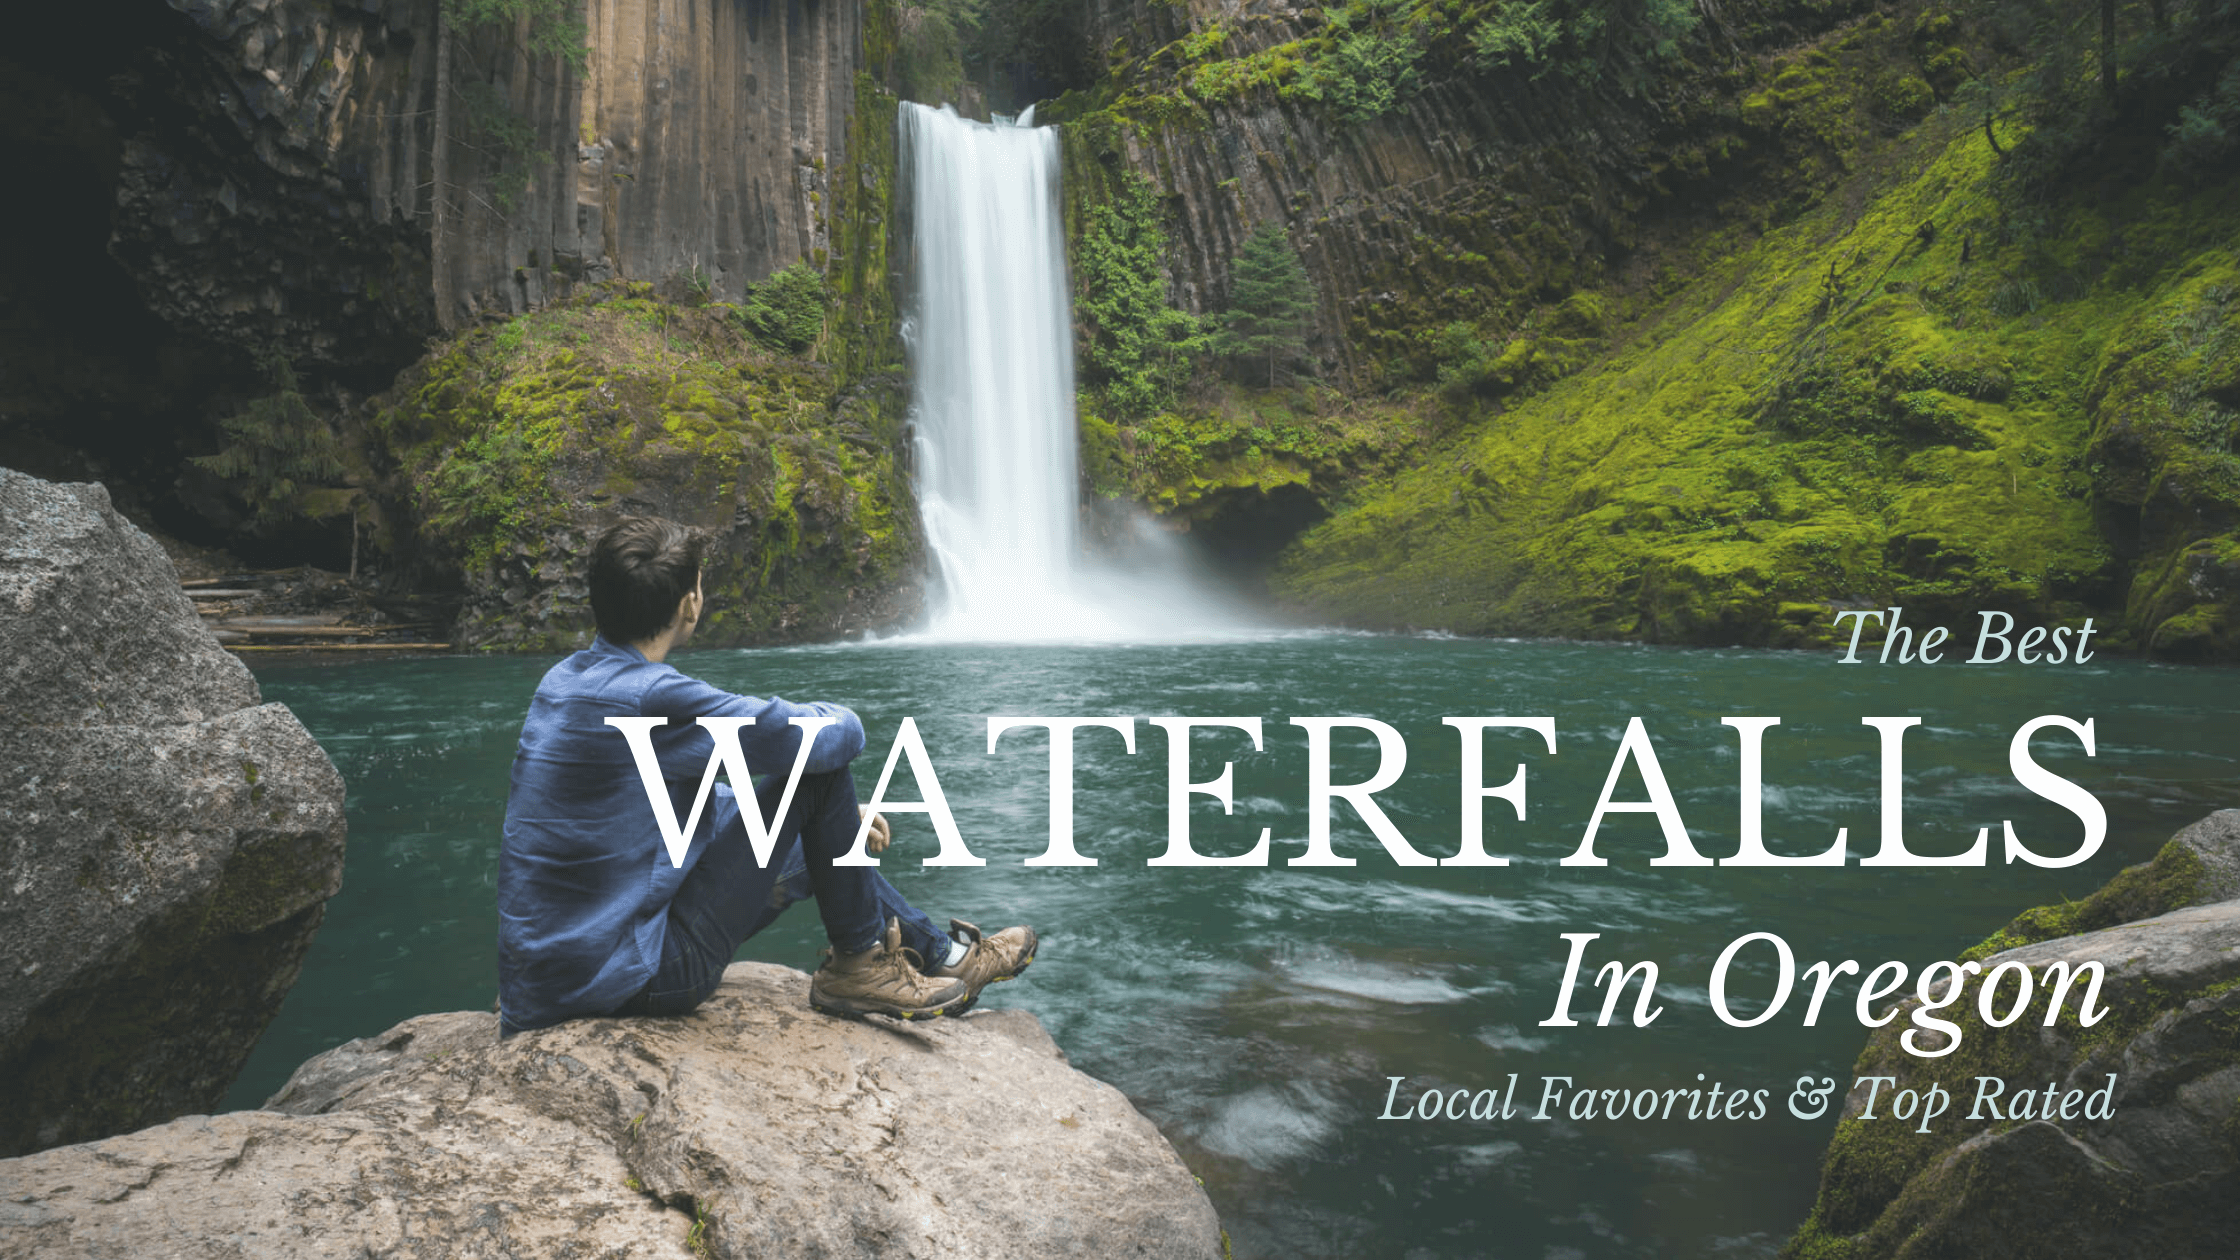 The 24 Best Waterfalls Near Me in Oregon - Top Rated Local Falls